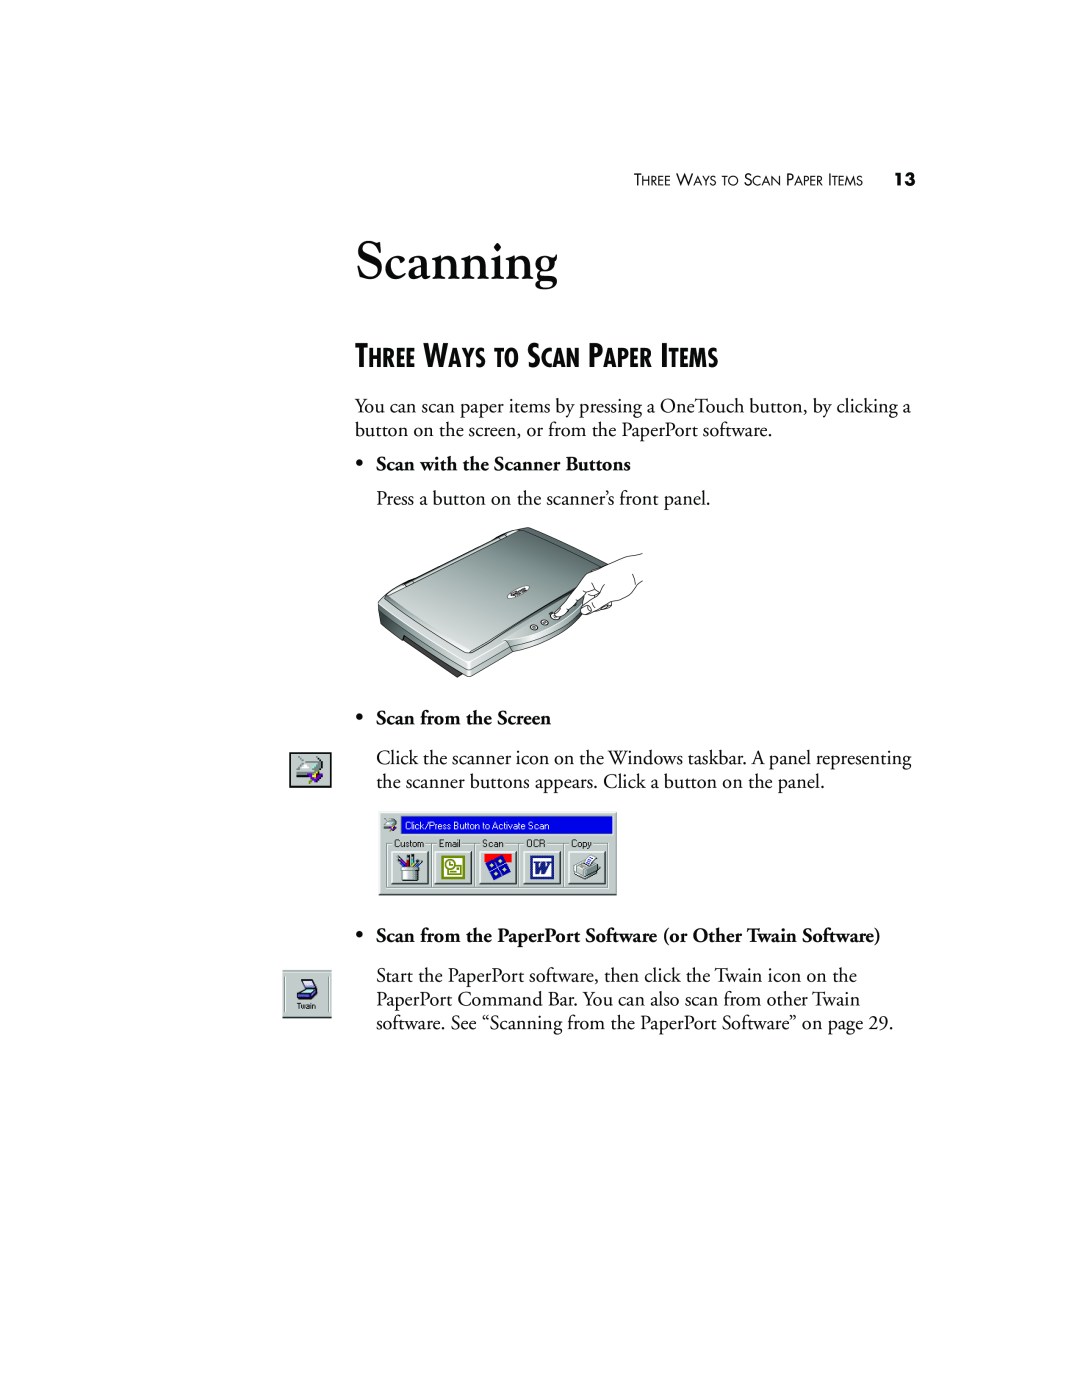 Visioneer 7100 manual Scanning, Three Ways To Scan Paper Items 